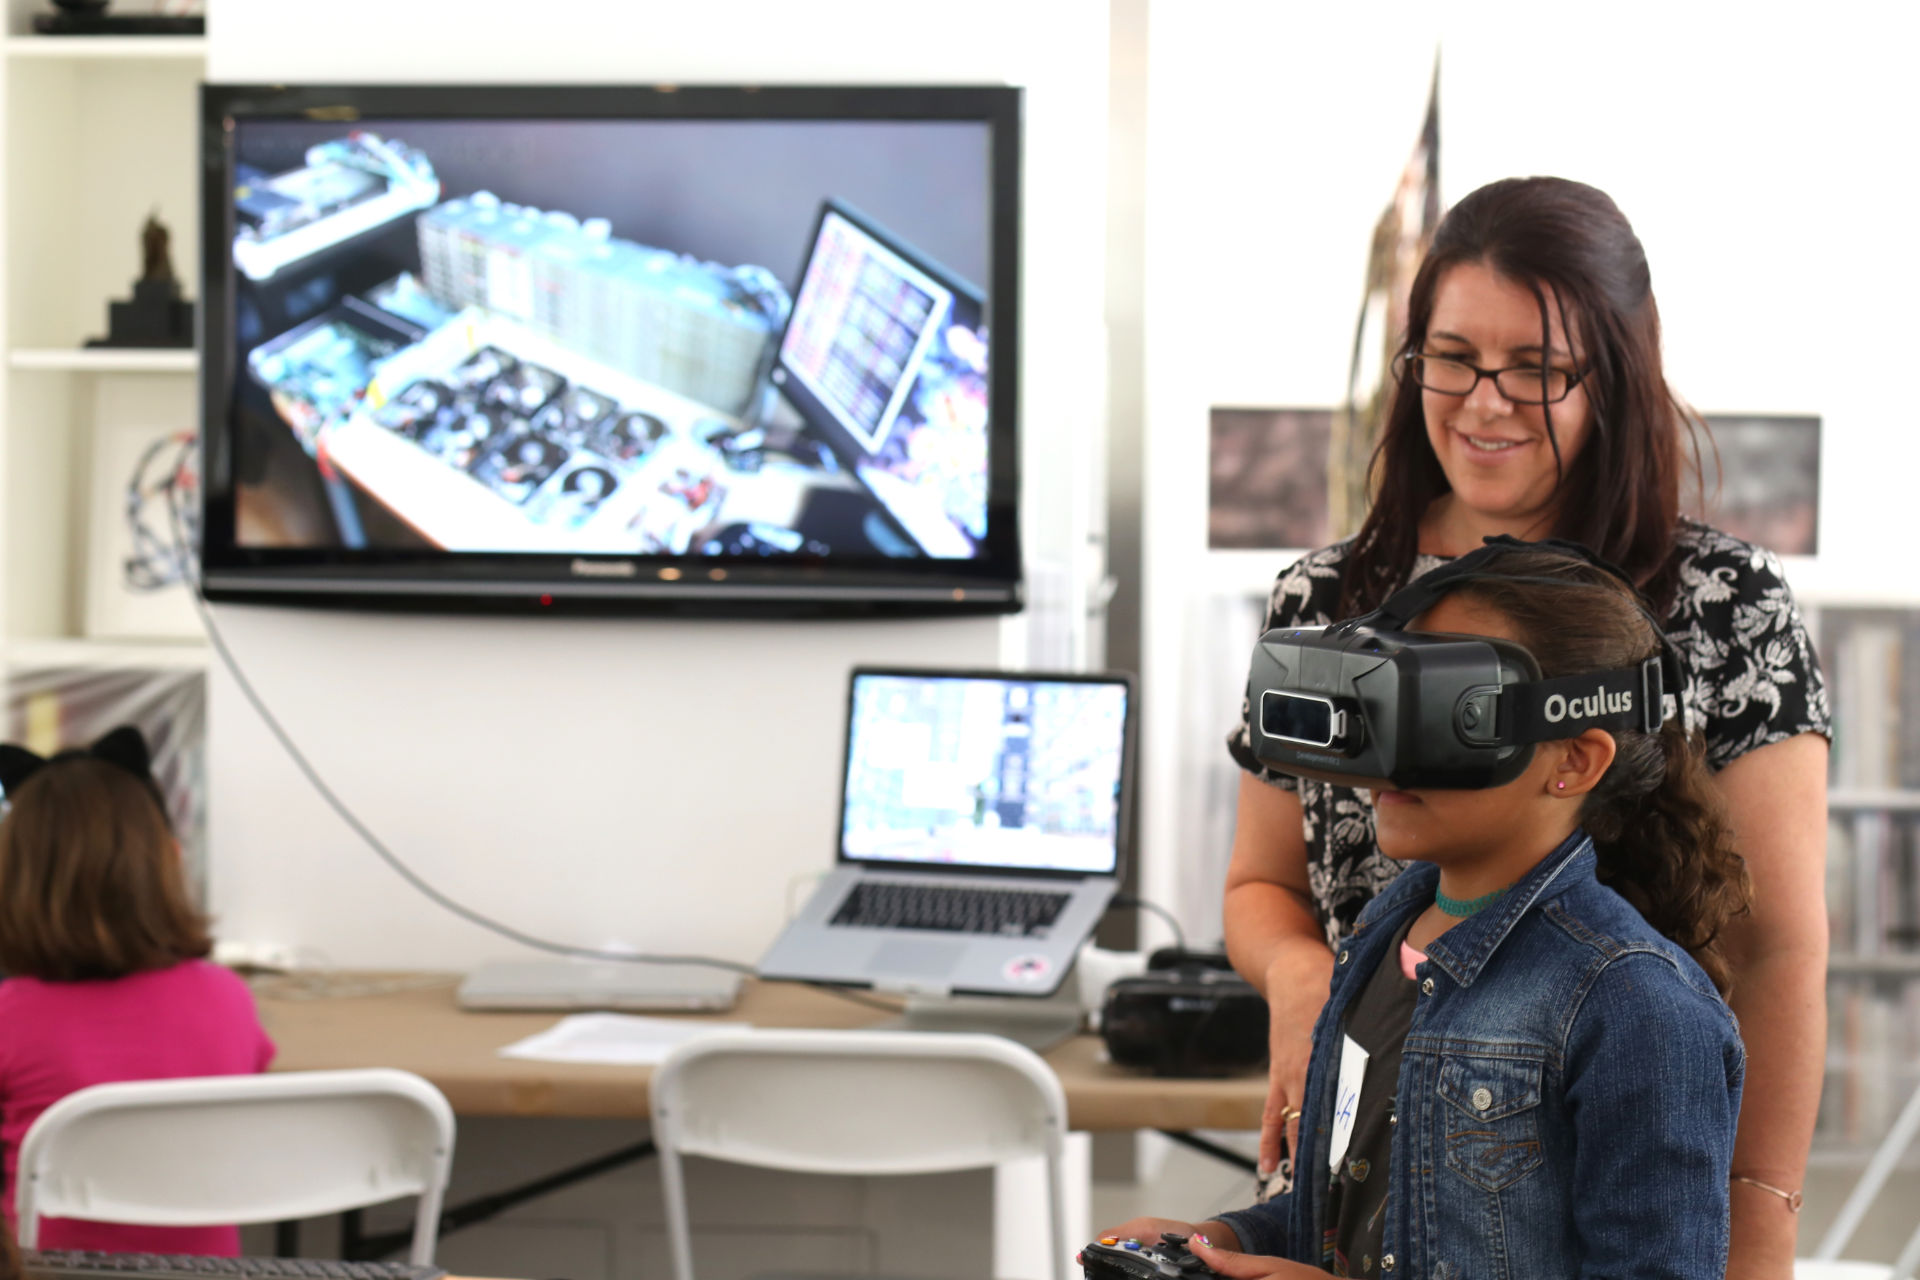 A kid using an Oculus and a woman smiling